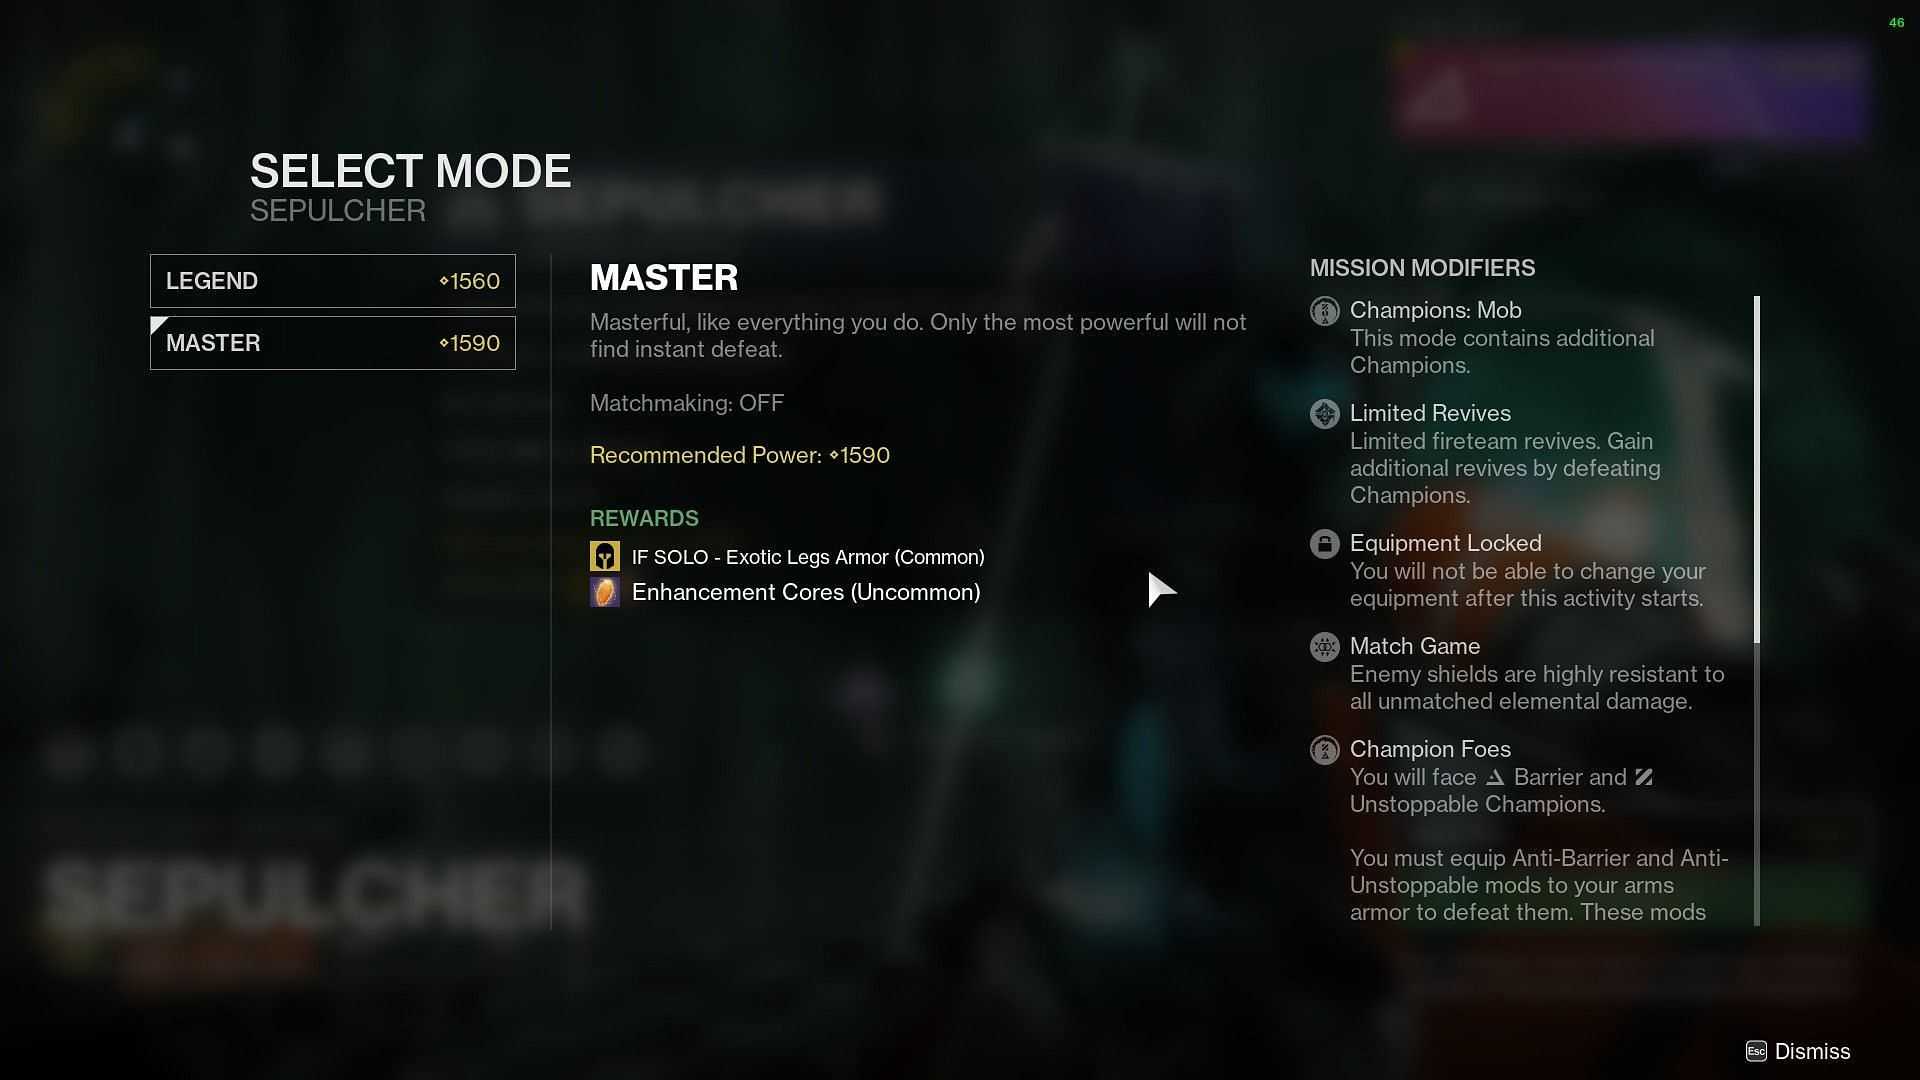 Lost Sector modifiers for today (Image via Destiny 2)